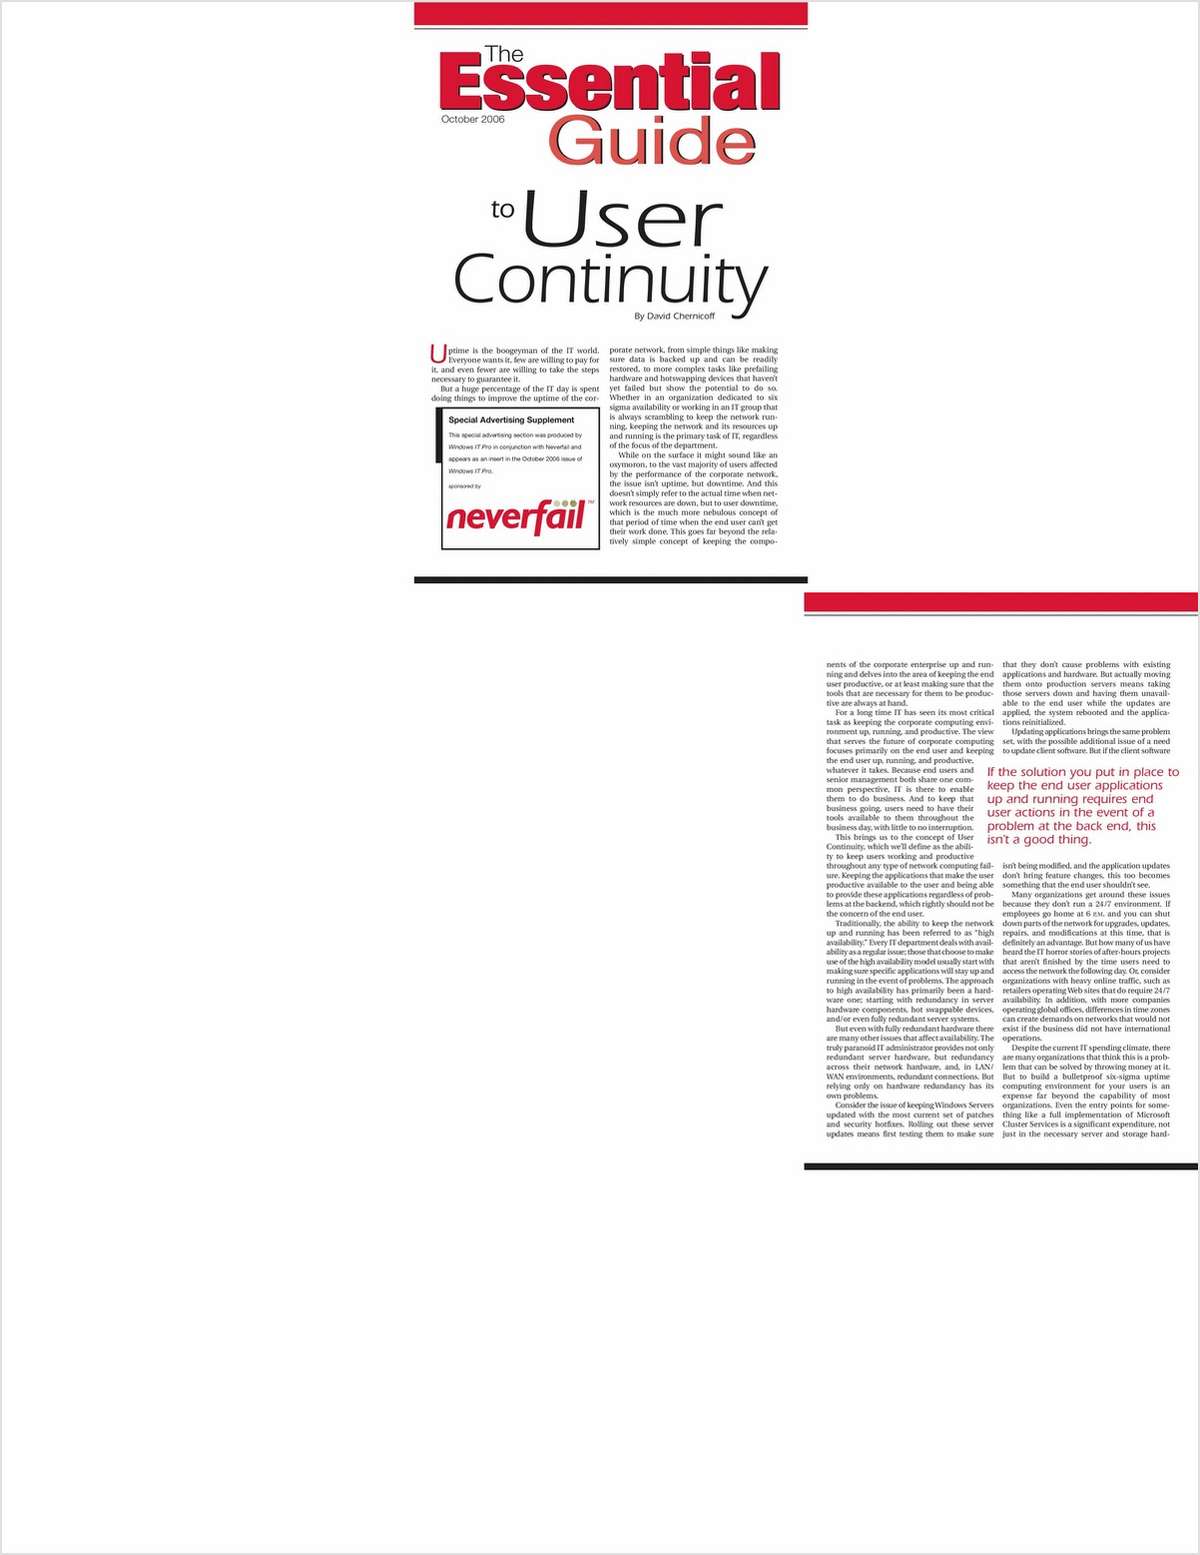 Essential Guide to User Continuity